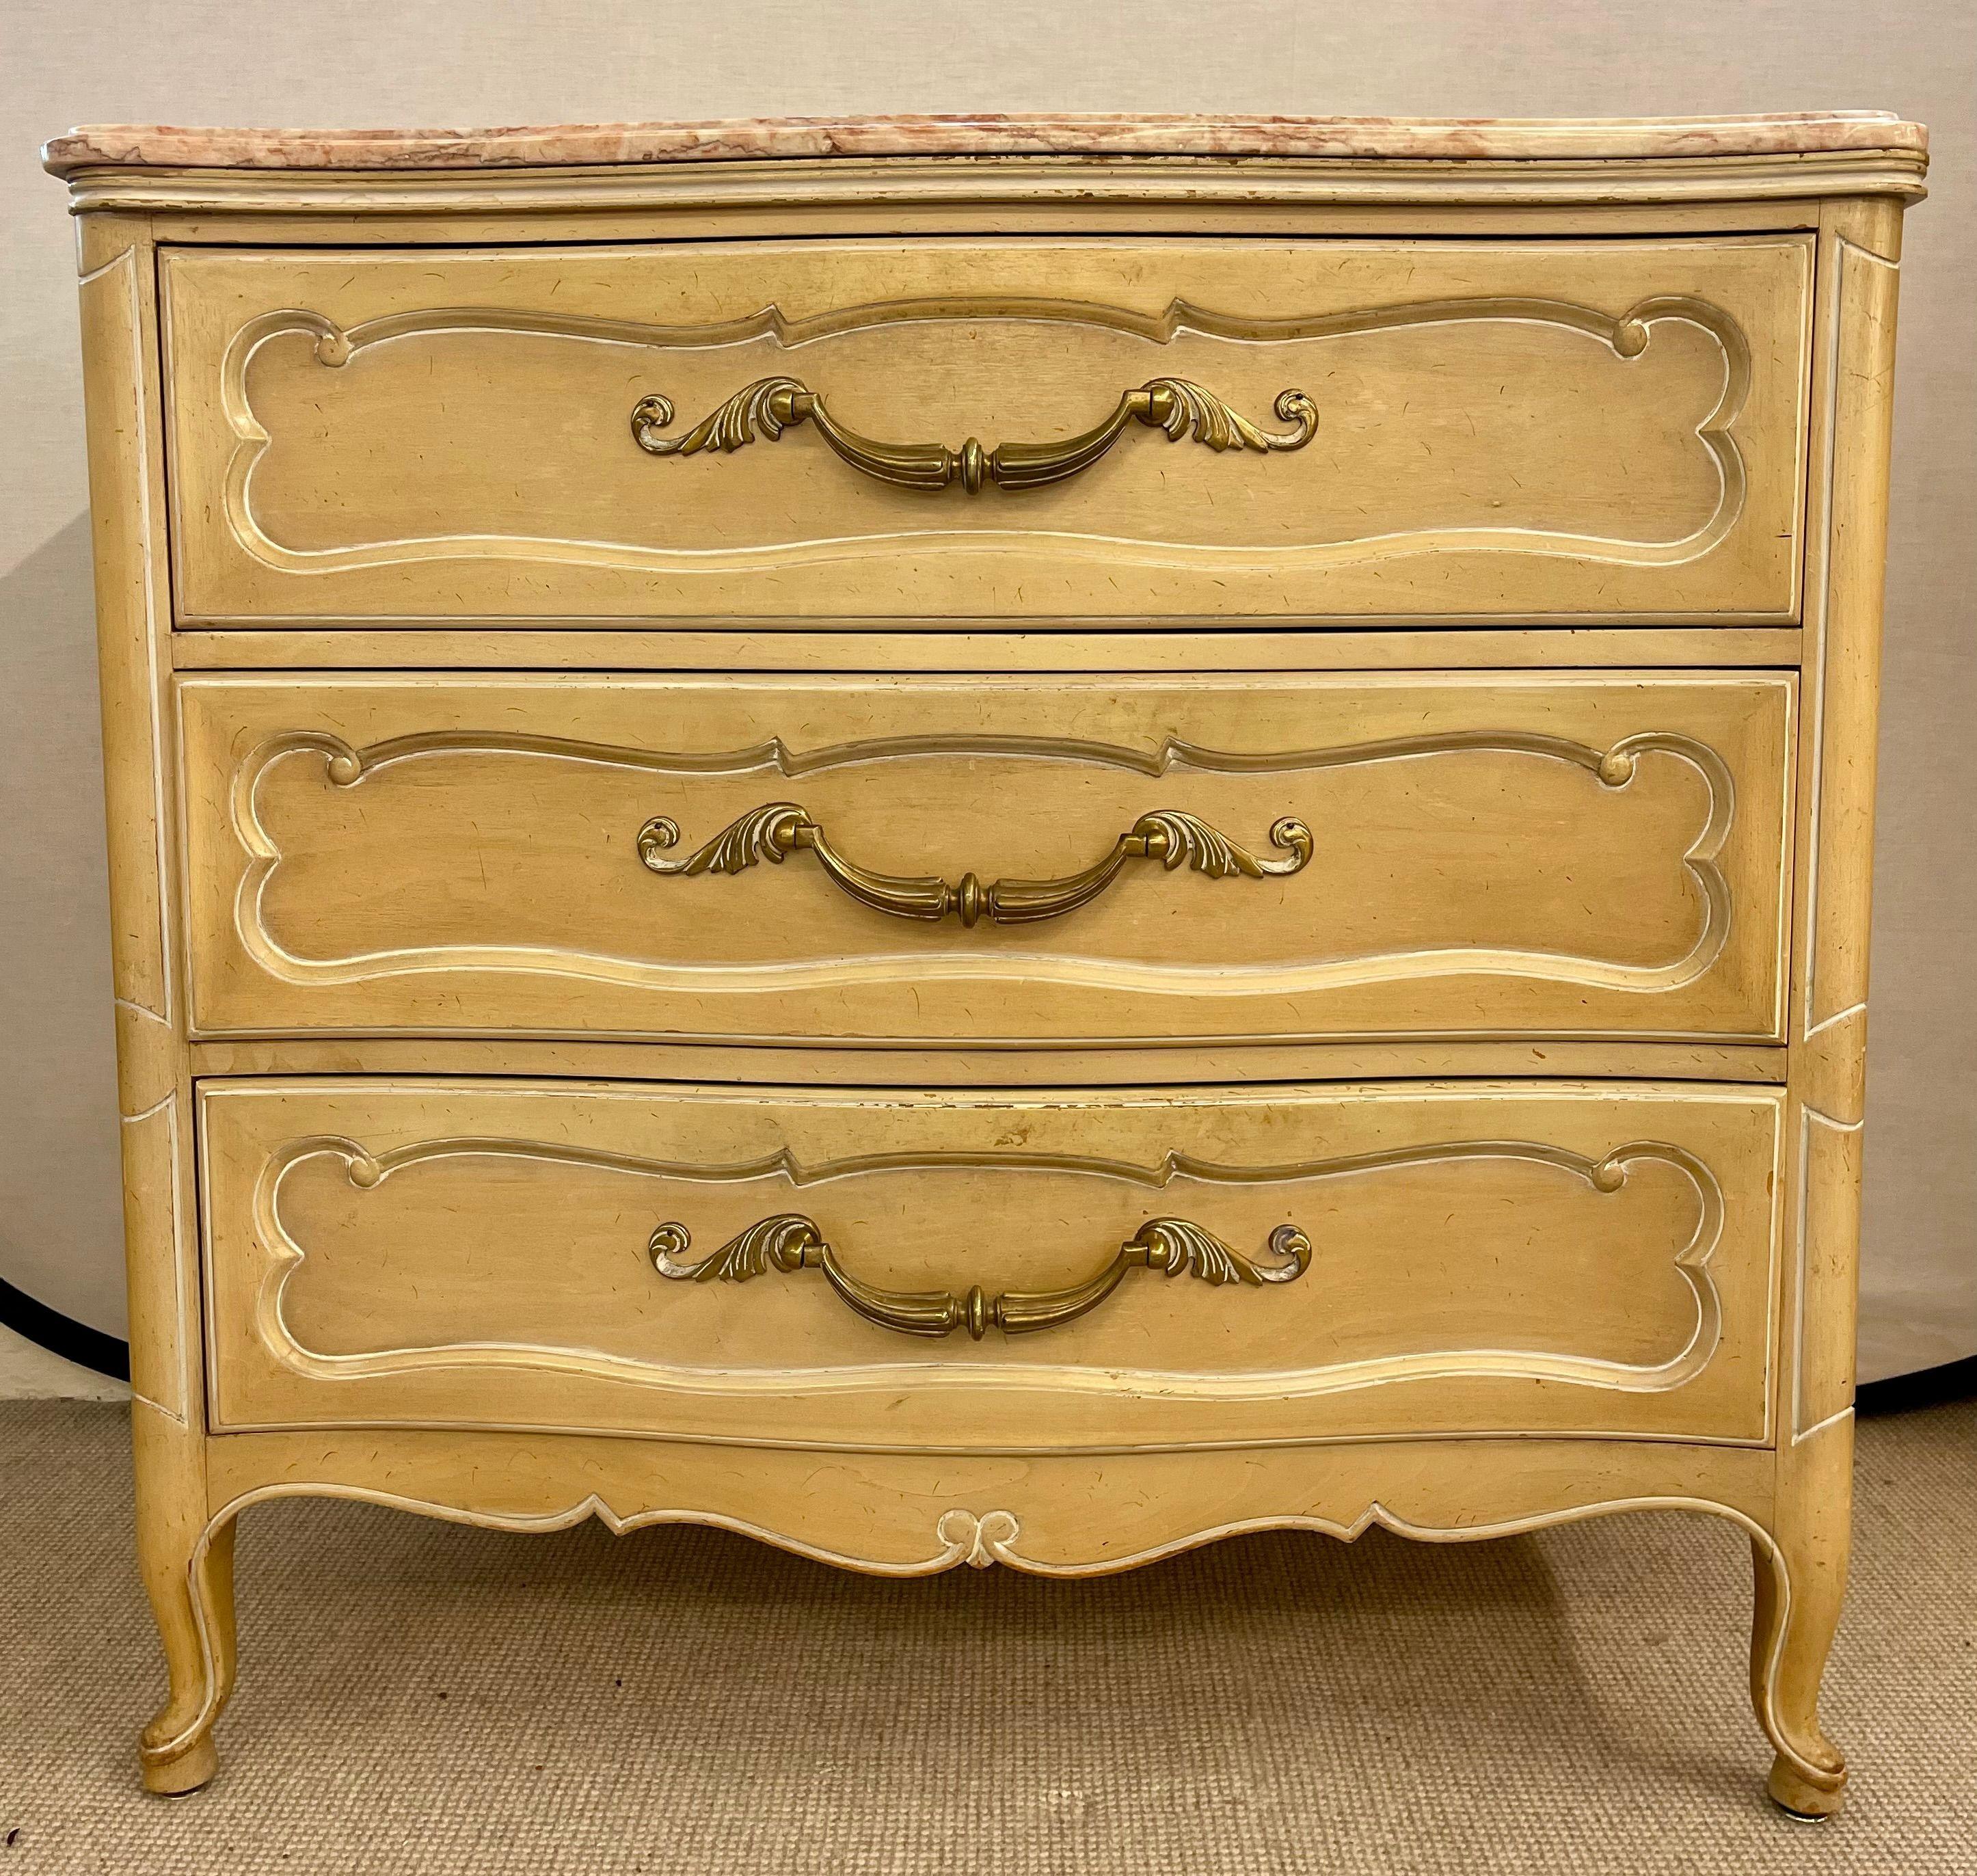 Pair Of Louis XV Style Grosfeld House Marble-Top Distressed Four-Drawer Commodes For Sale 1